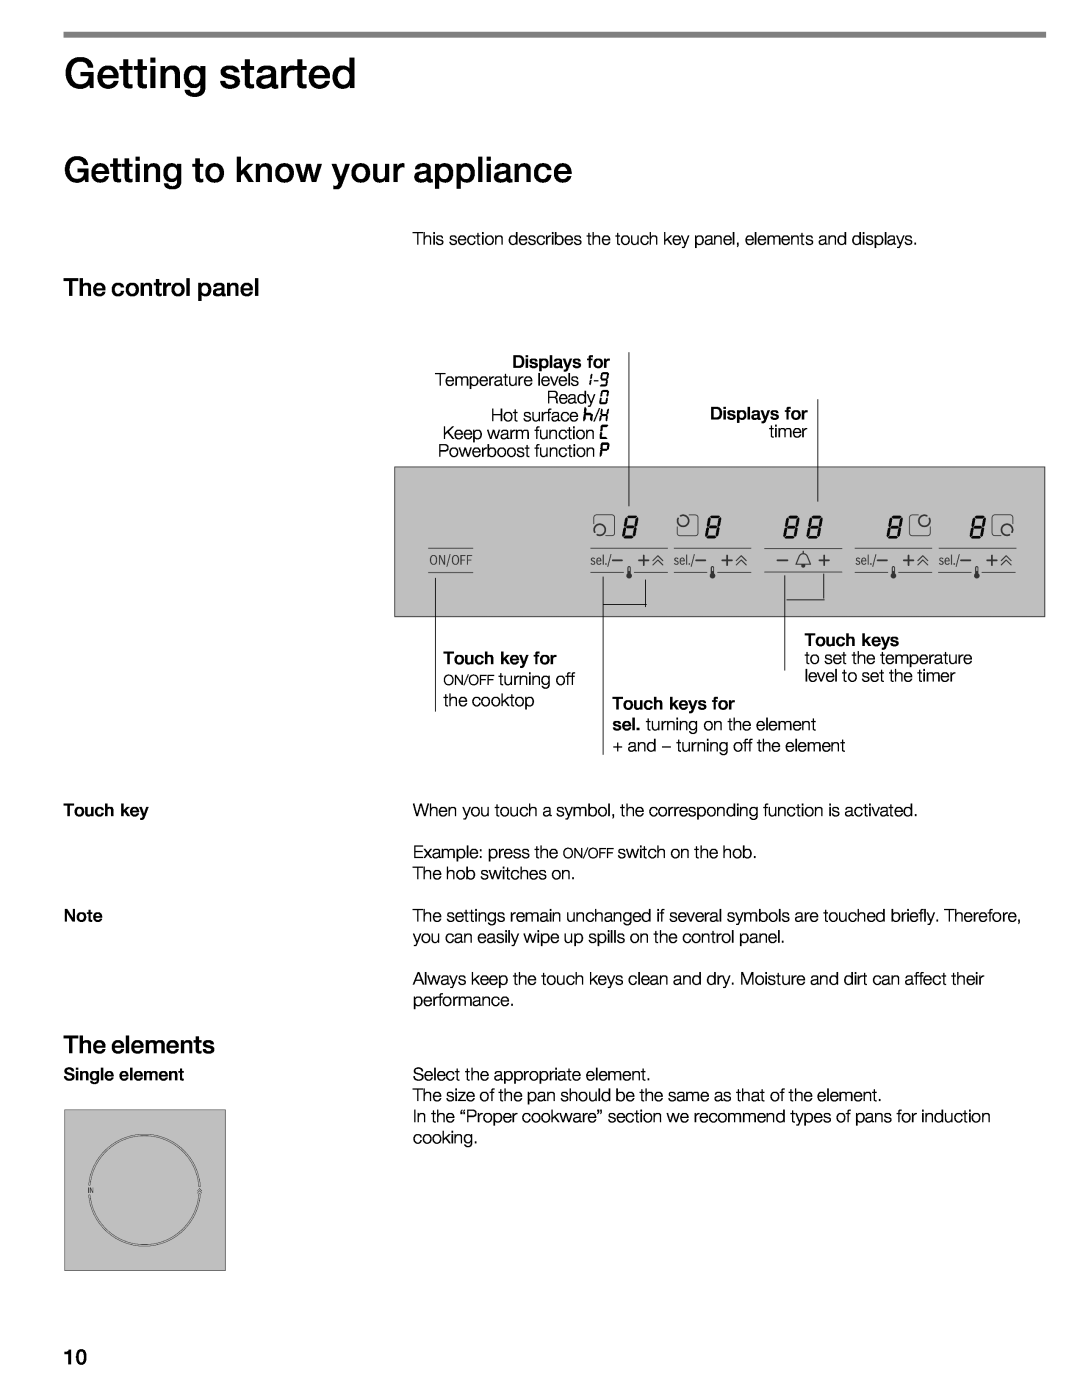 Bosch Appliances NIT8053UC manual Getting started, Getting to know your appliance, The control panel, elements 